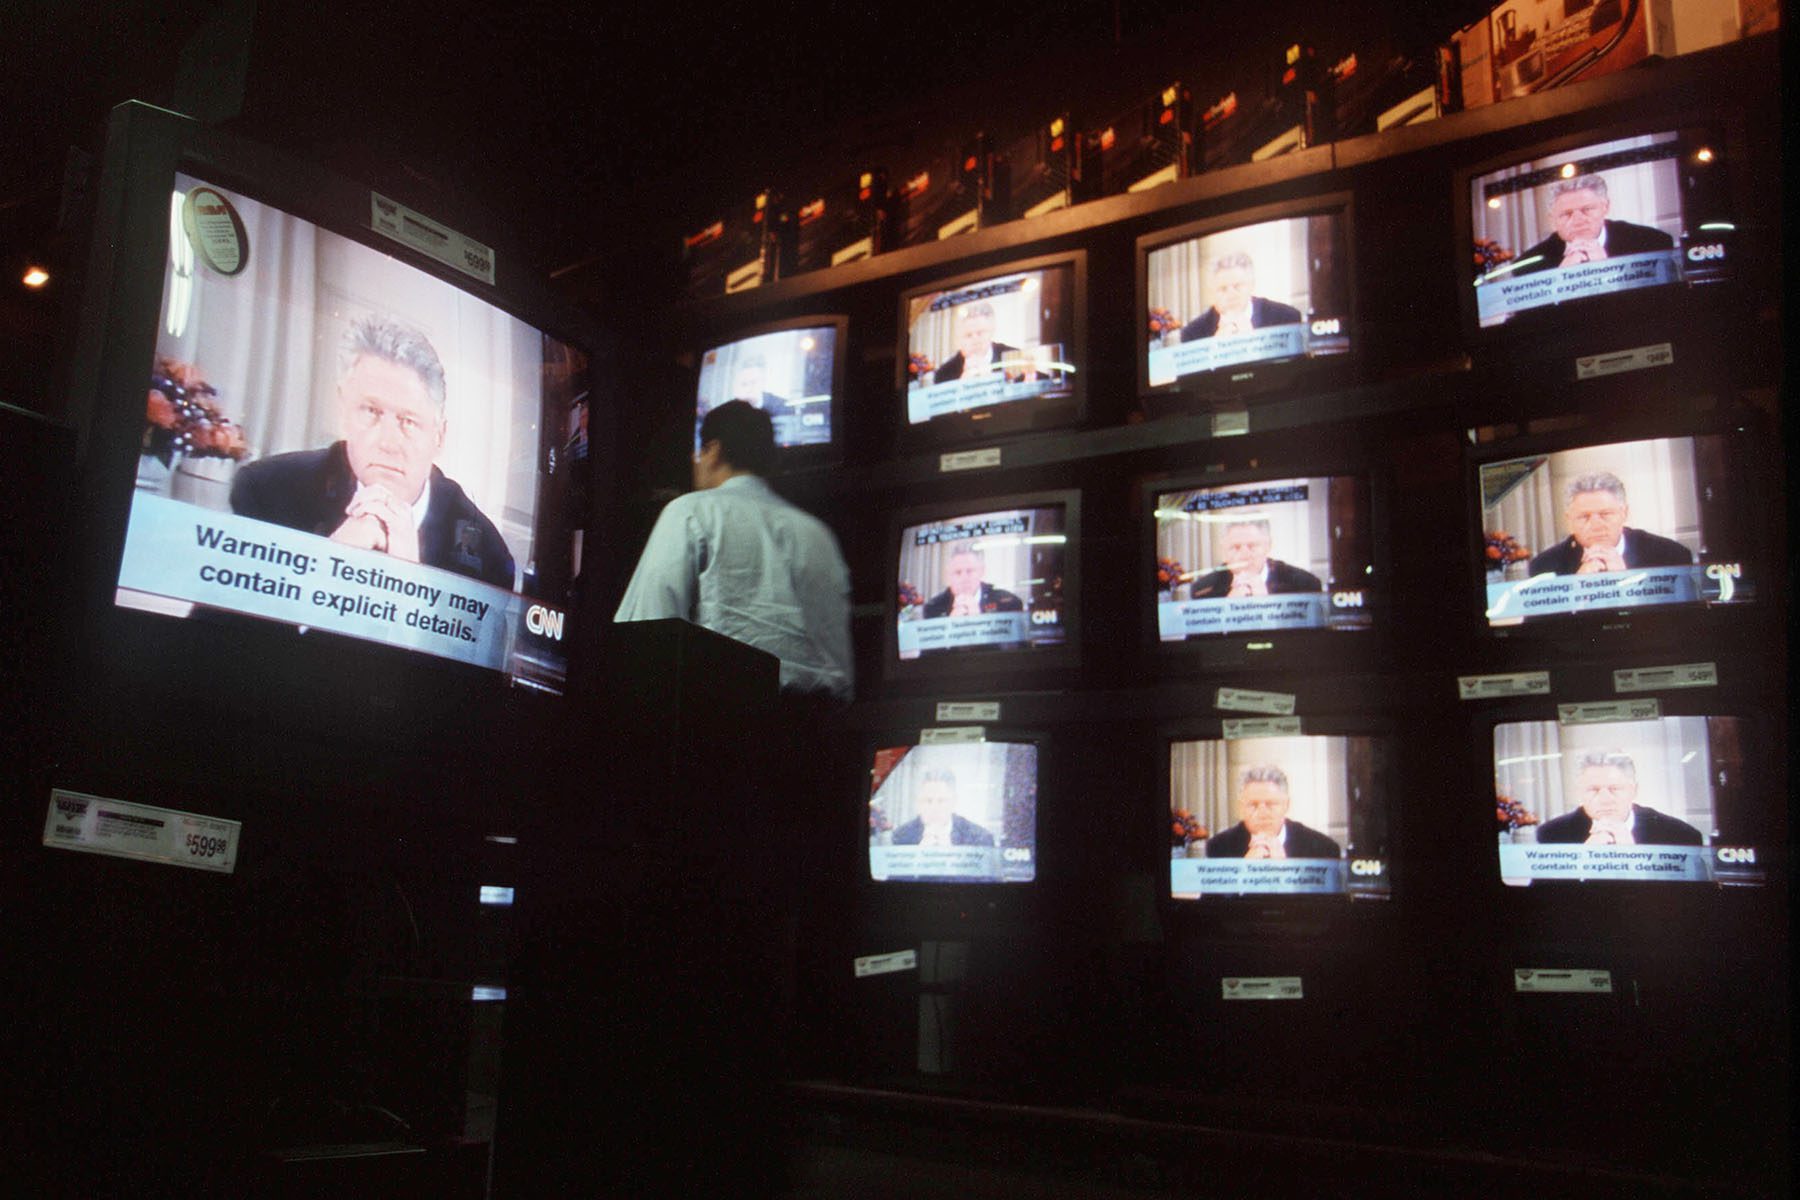 A person stands in front of multiple television monitors broadcasting President Bill Clinton's Grand Jury testimony on the Monica Lewinsky affair in an electronics store.